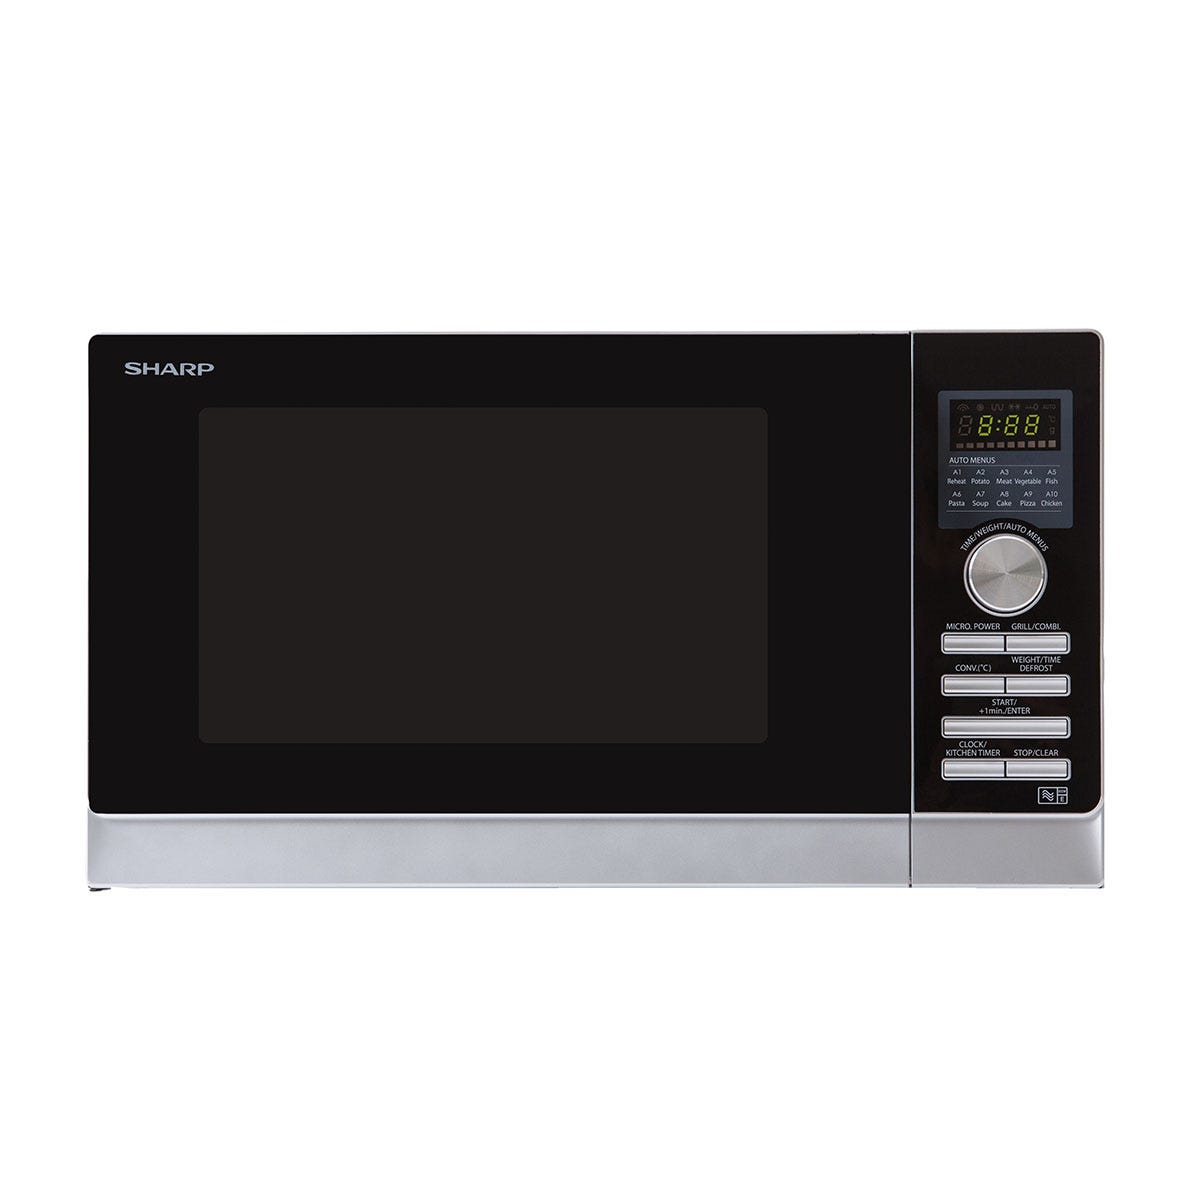 Sharp R843SLM 25L 900W Convection Microwave - Stainless Steel